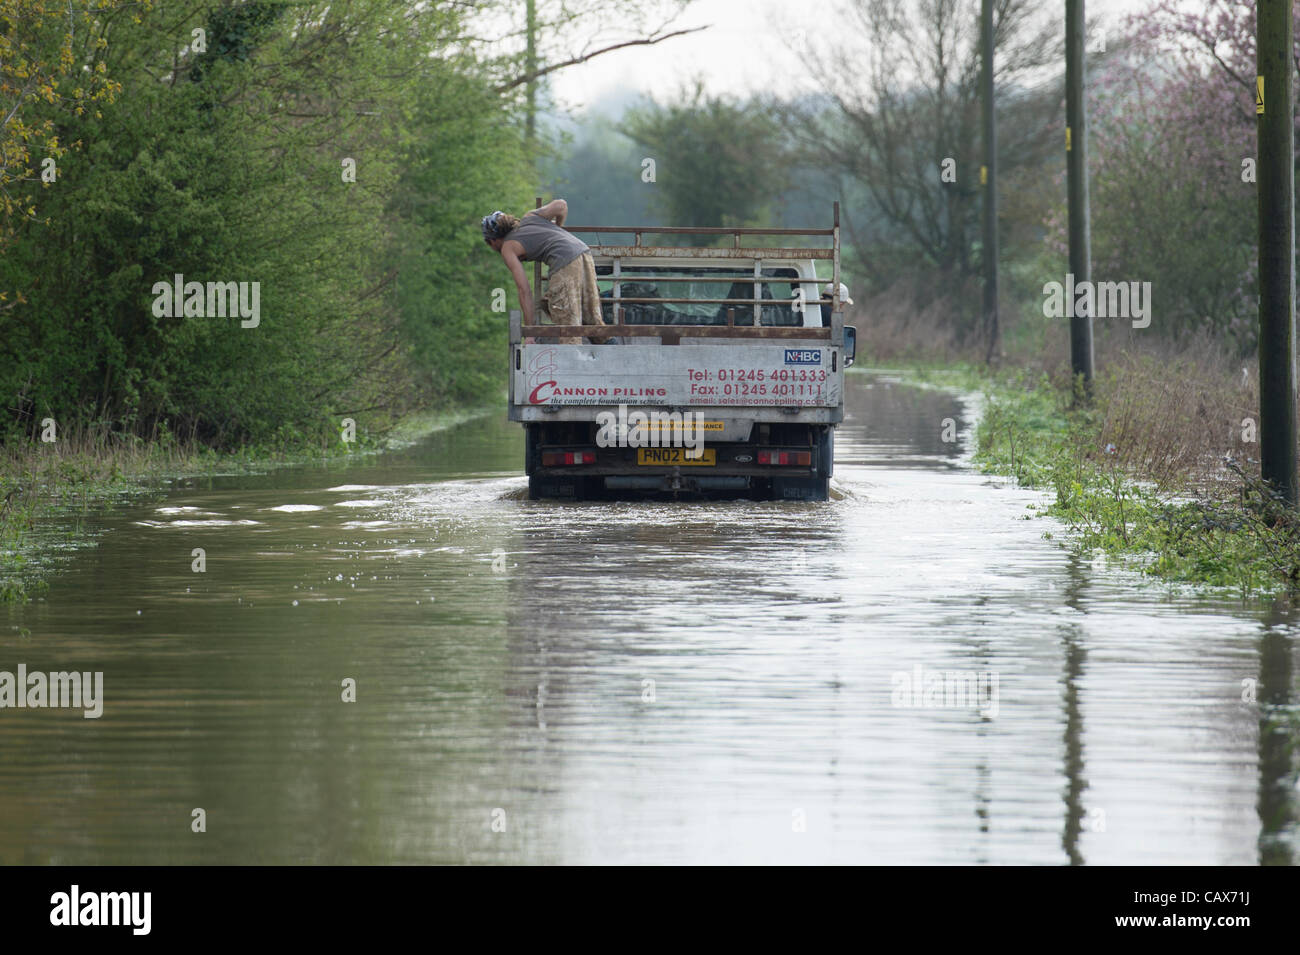 1st May 2012, Billericay, Essex, UK. Truck travels through flood water as passenger and driver check depth. Torrential rain has lead to local flooding that has become worse even though rain has stopped due to run-off from surrounding fields. Stock Photo